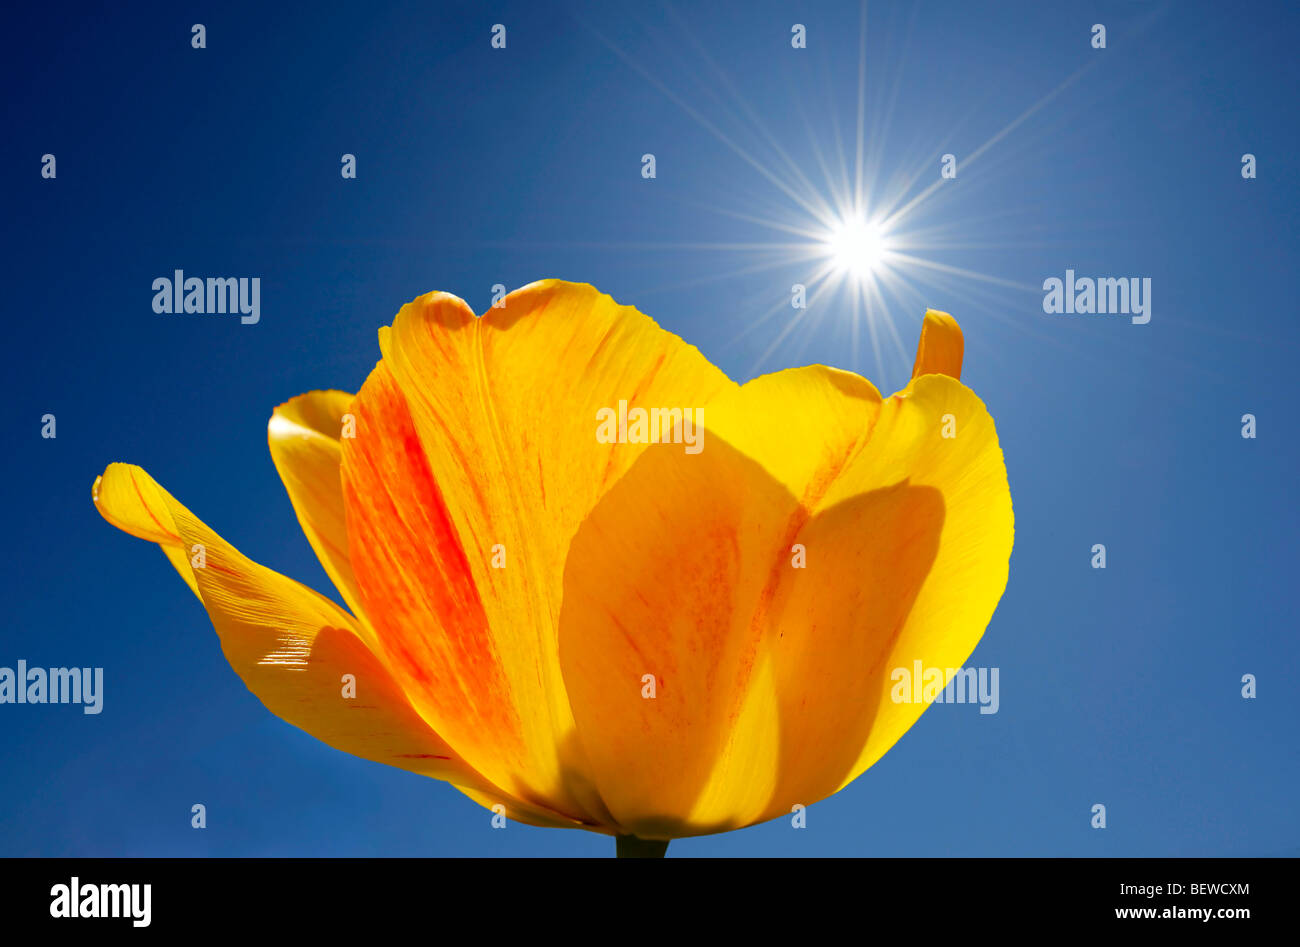 Yellow tulip blossom in front of blue sky, contre-jour photograph Stock Photo